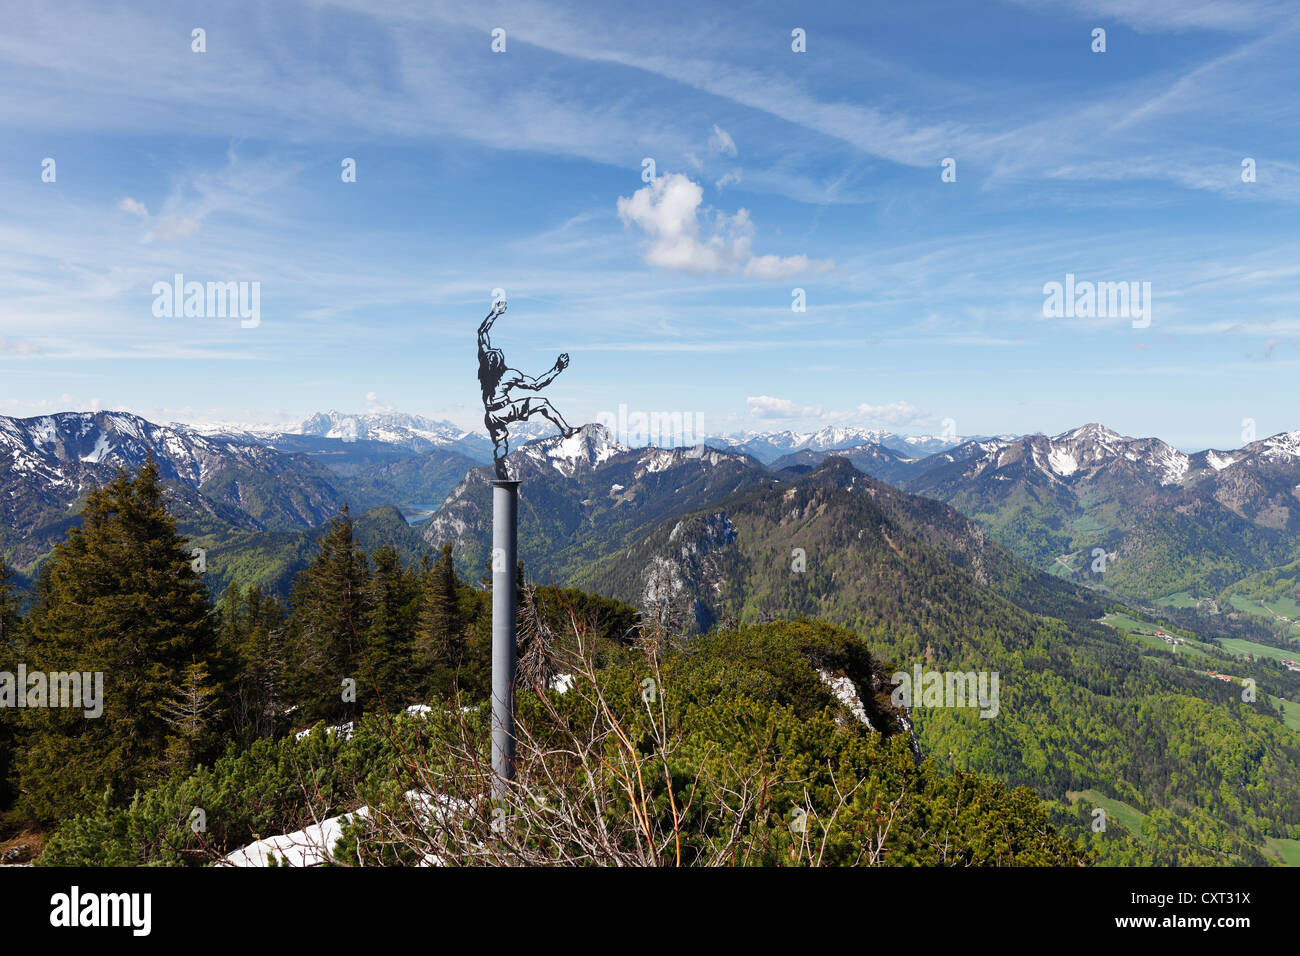 Sculpture 'Der Himmelskletterer', 'The Sky Climber' by Walter Angerer the Younger 2011, Mt Rauschberg, Chiemgau Alps Stock Photo